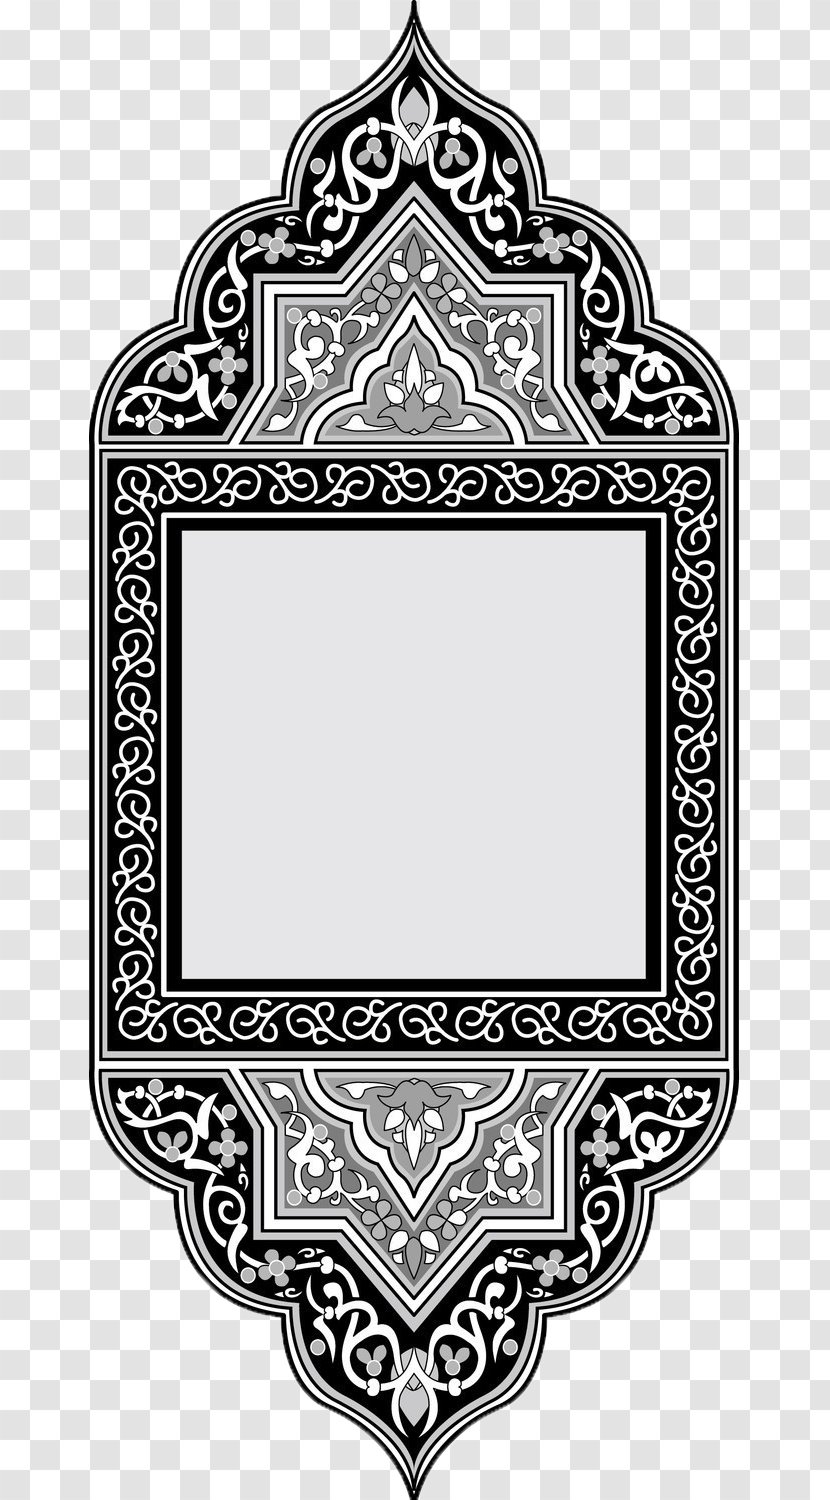 Islam Euclidean Vector - Hui People - A Black And White Decorative Frame In Islamic Style Transparent PNG